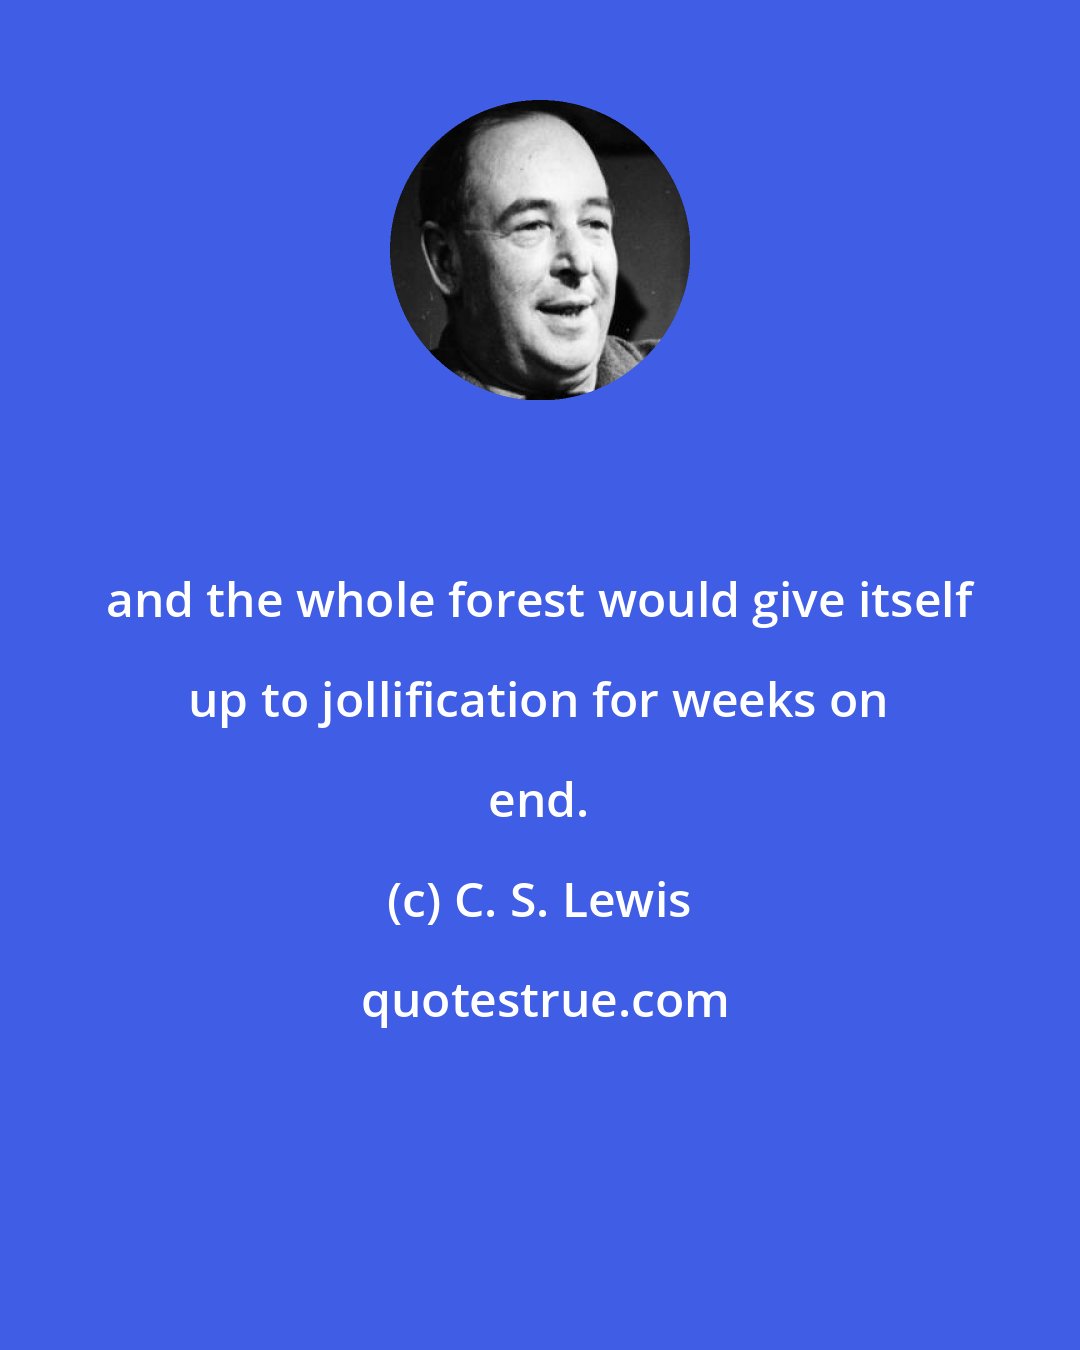 C. S. Lewis: and the whole forest would give itself up to jollification for weeks on end.